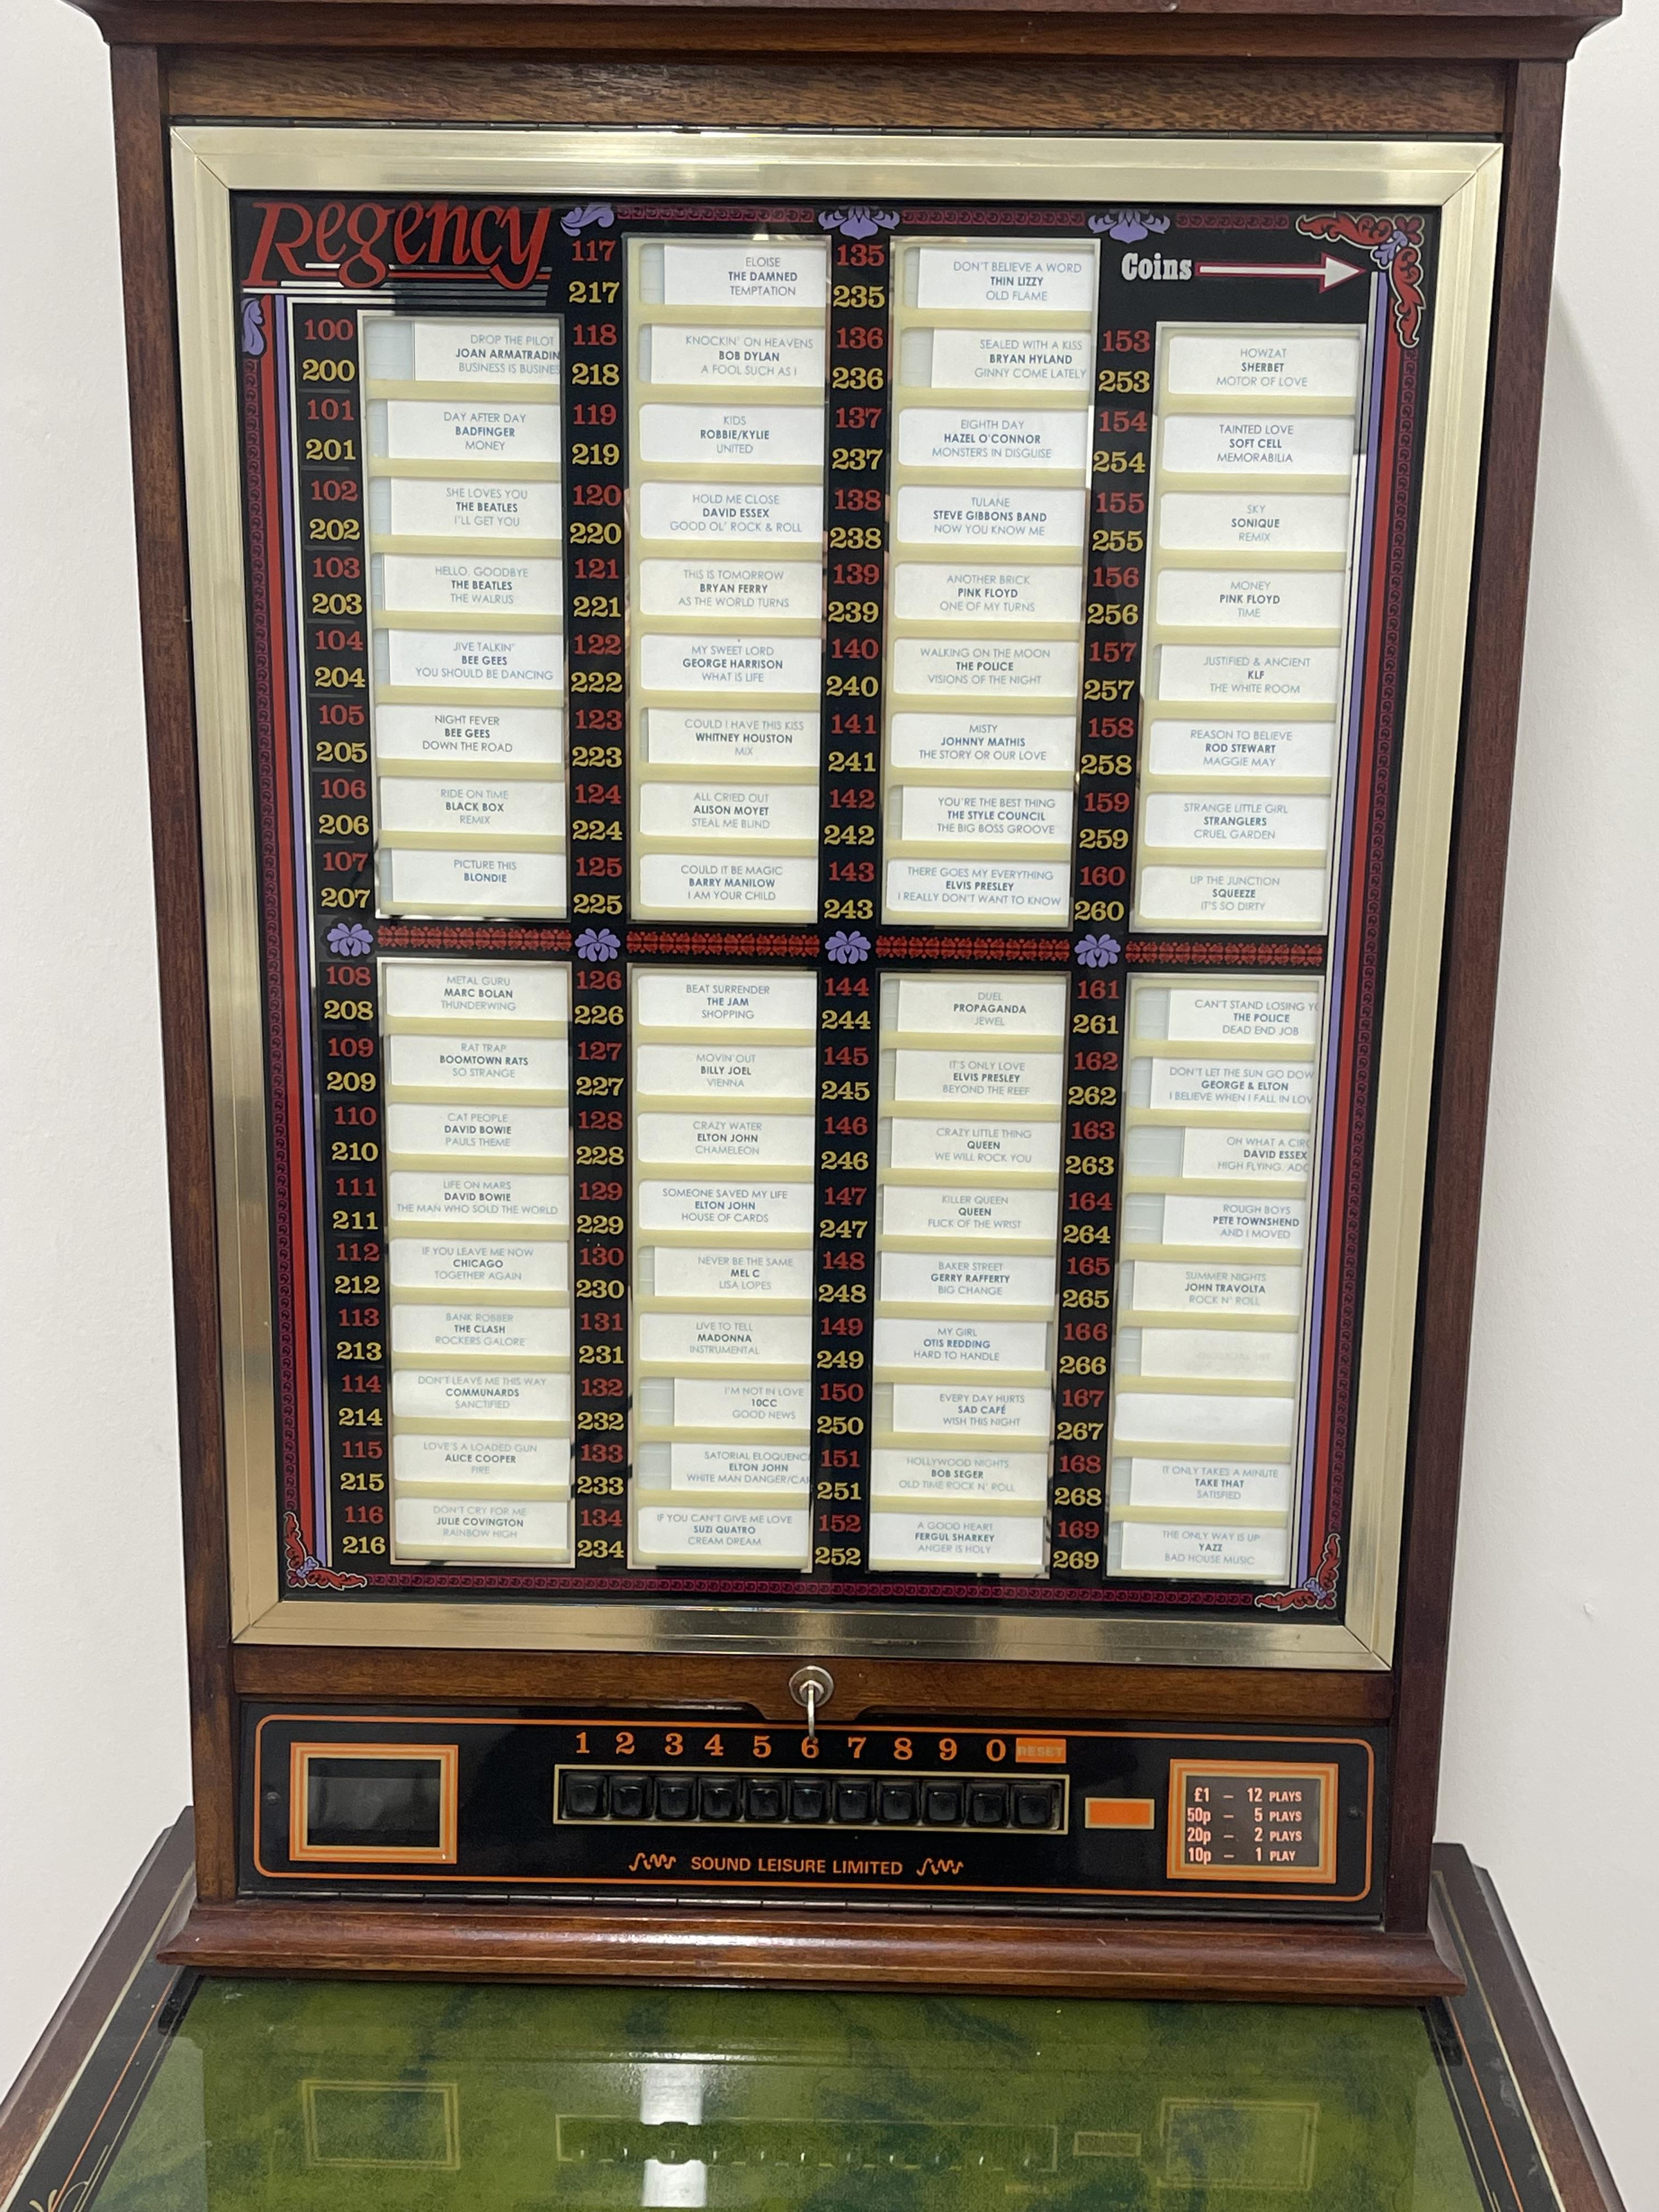 Regency “Sound leisure limited” juke box, with key & large quantity of 45’s records - H172 W41 L64 - Image 3 of 7